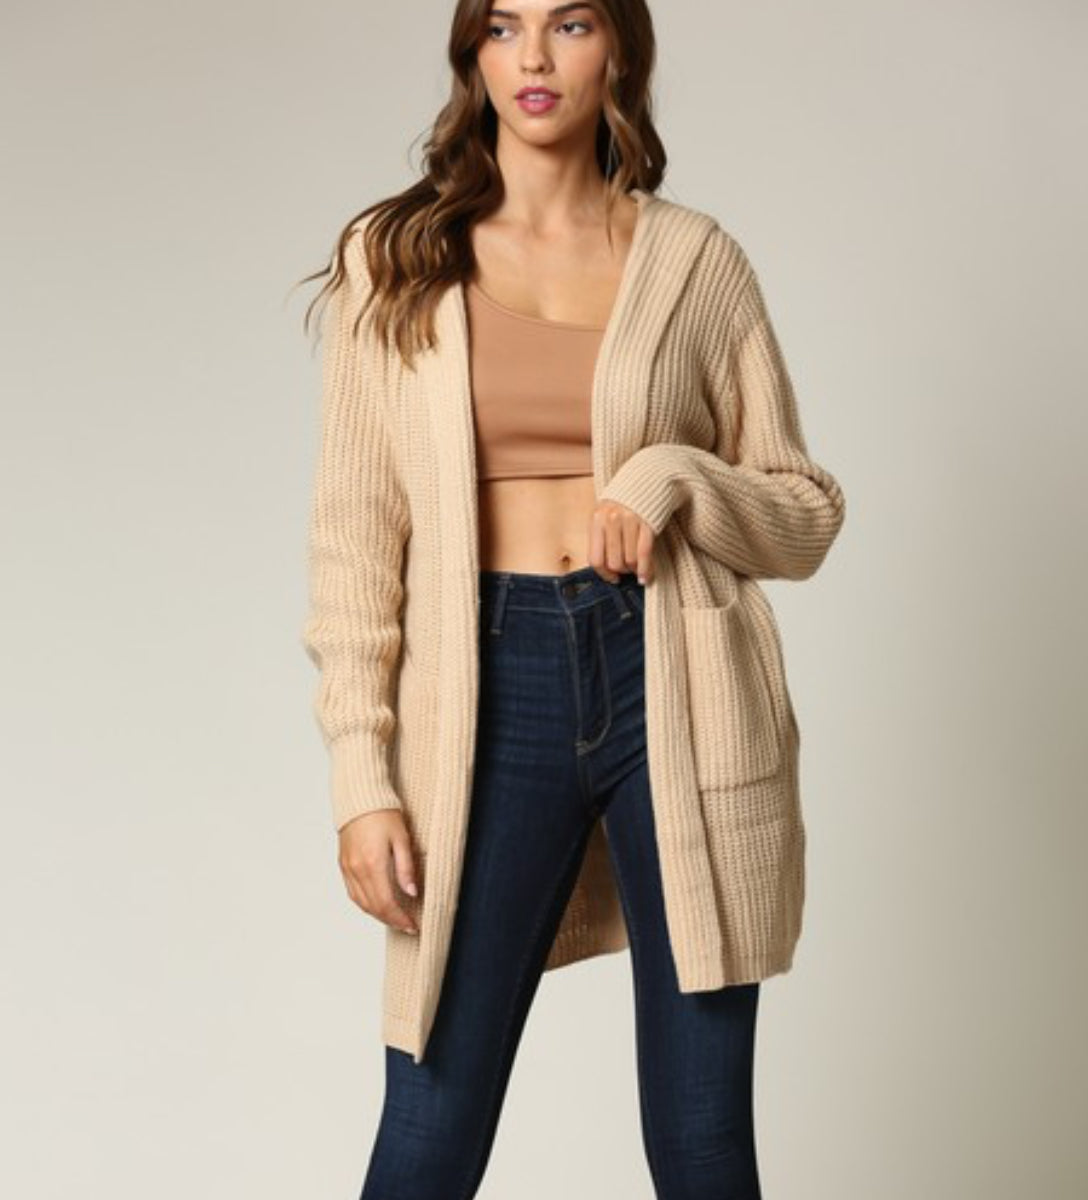 Beige knitted cardigan